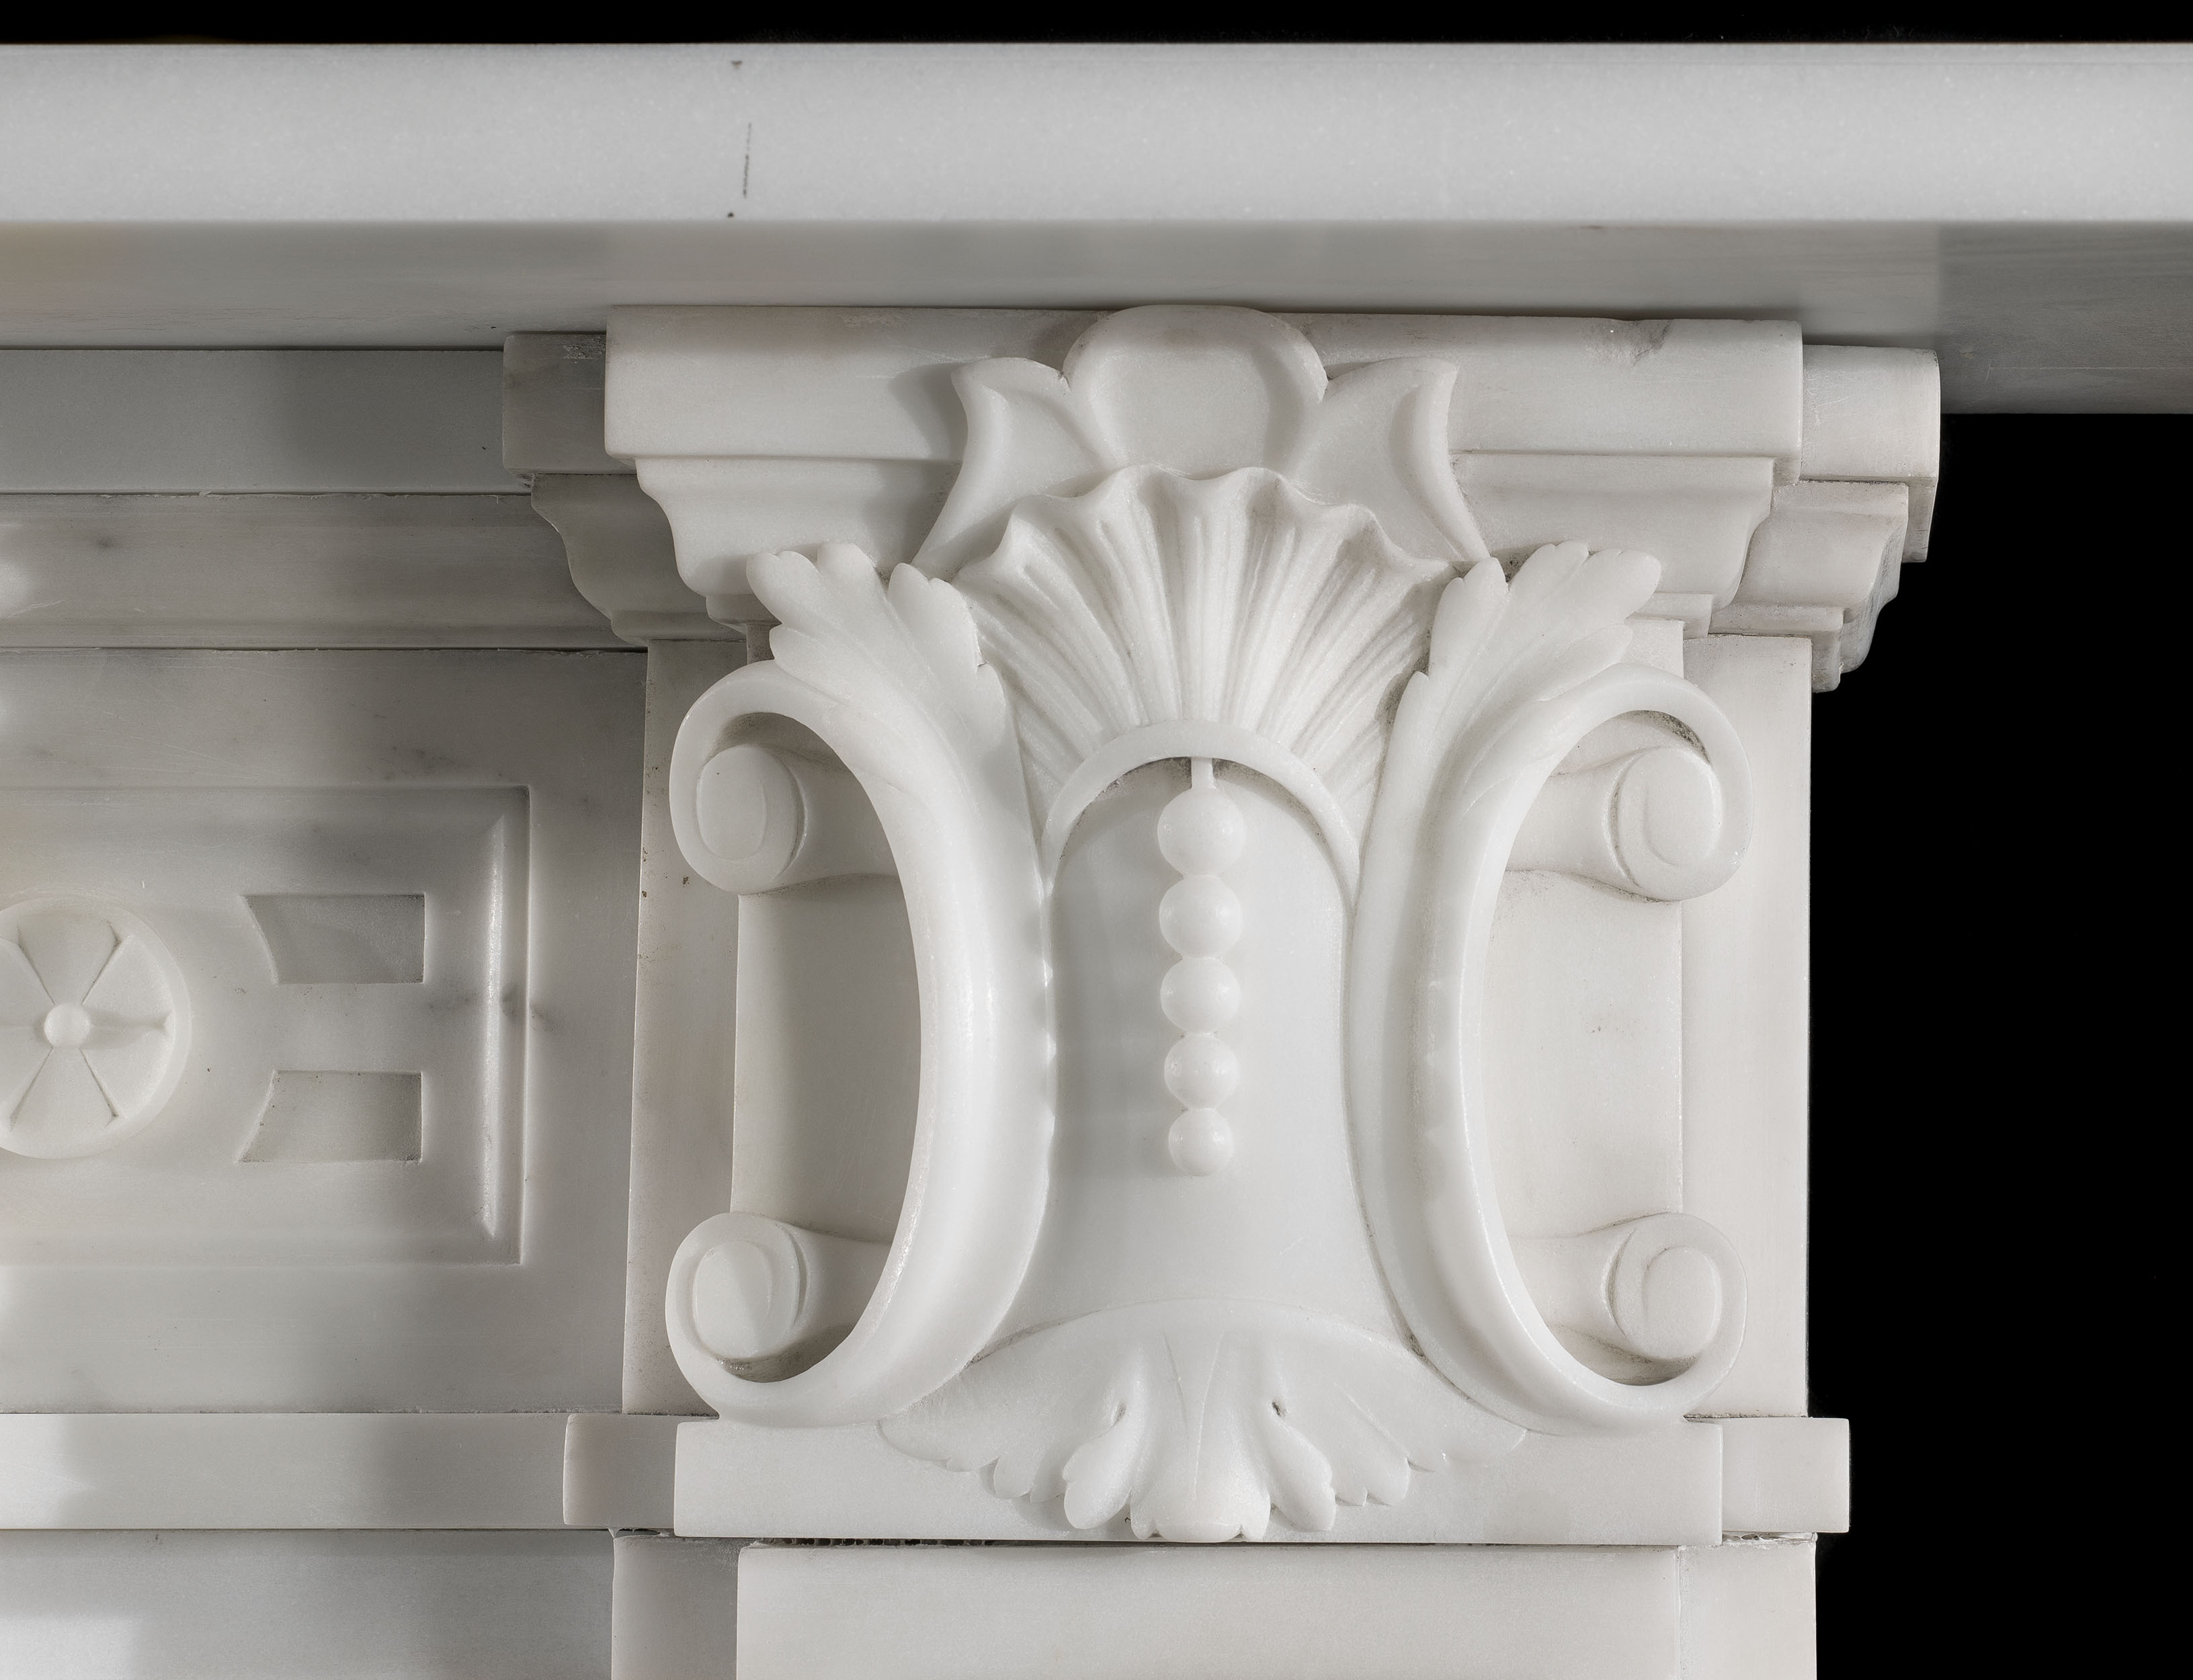  An antique Victorian fireplace mantel in white statuary marble 